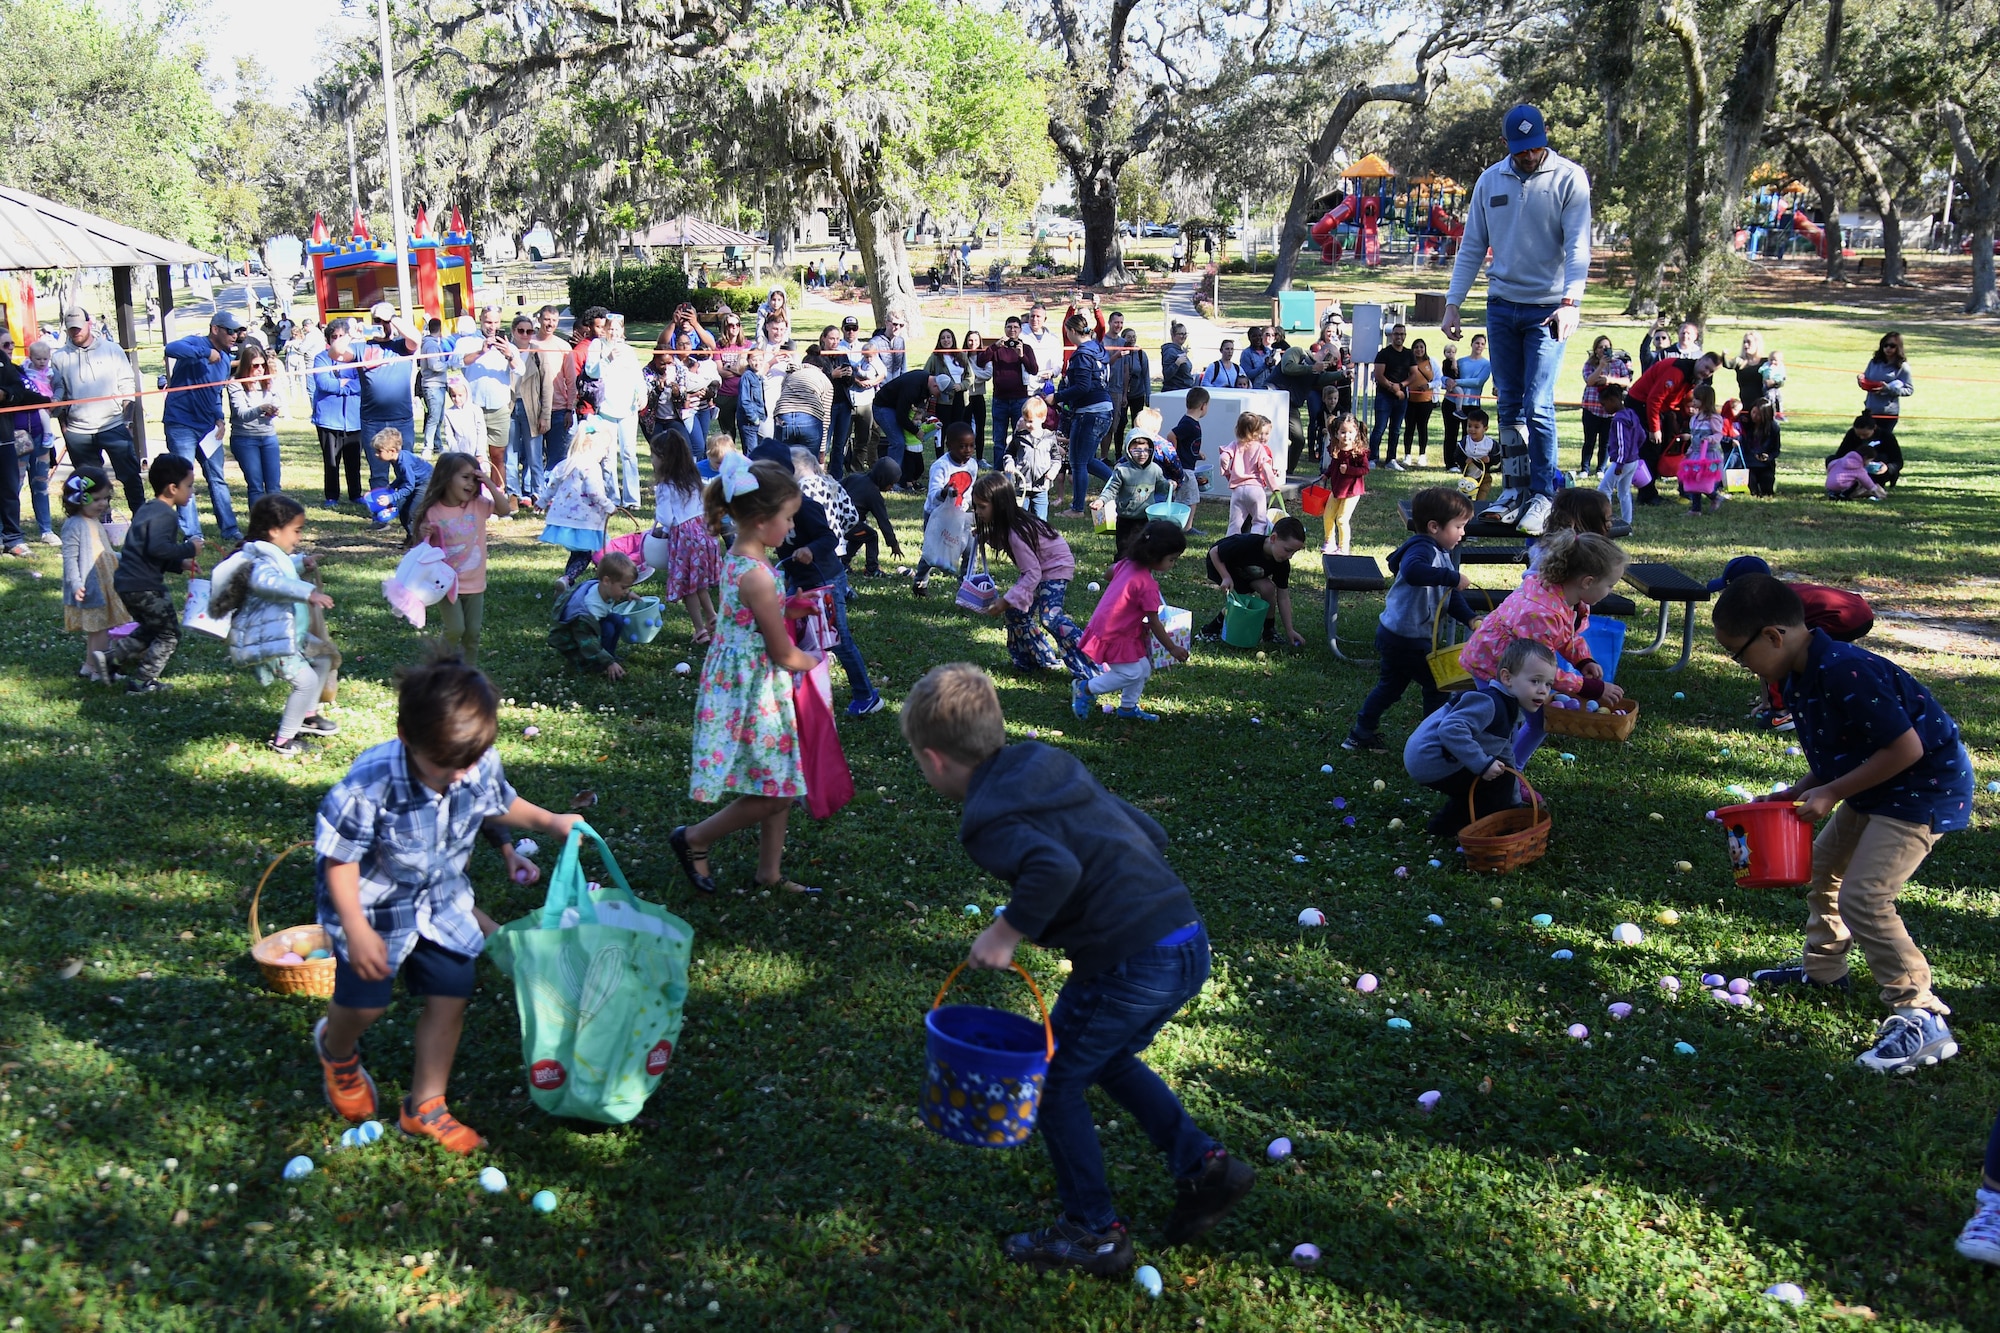 Children of Keesler personnel pick up Easter eggs during Keesler's Eggstravaganza at the marina park at Keesler Air Force Base, Mississippi, April 9, 2022. The 81st Force Support Squadron hosted the event for military children. (U.S. Air Force photo by Kemberly Groue)